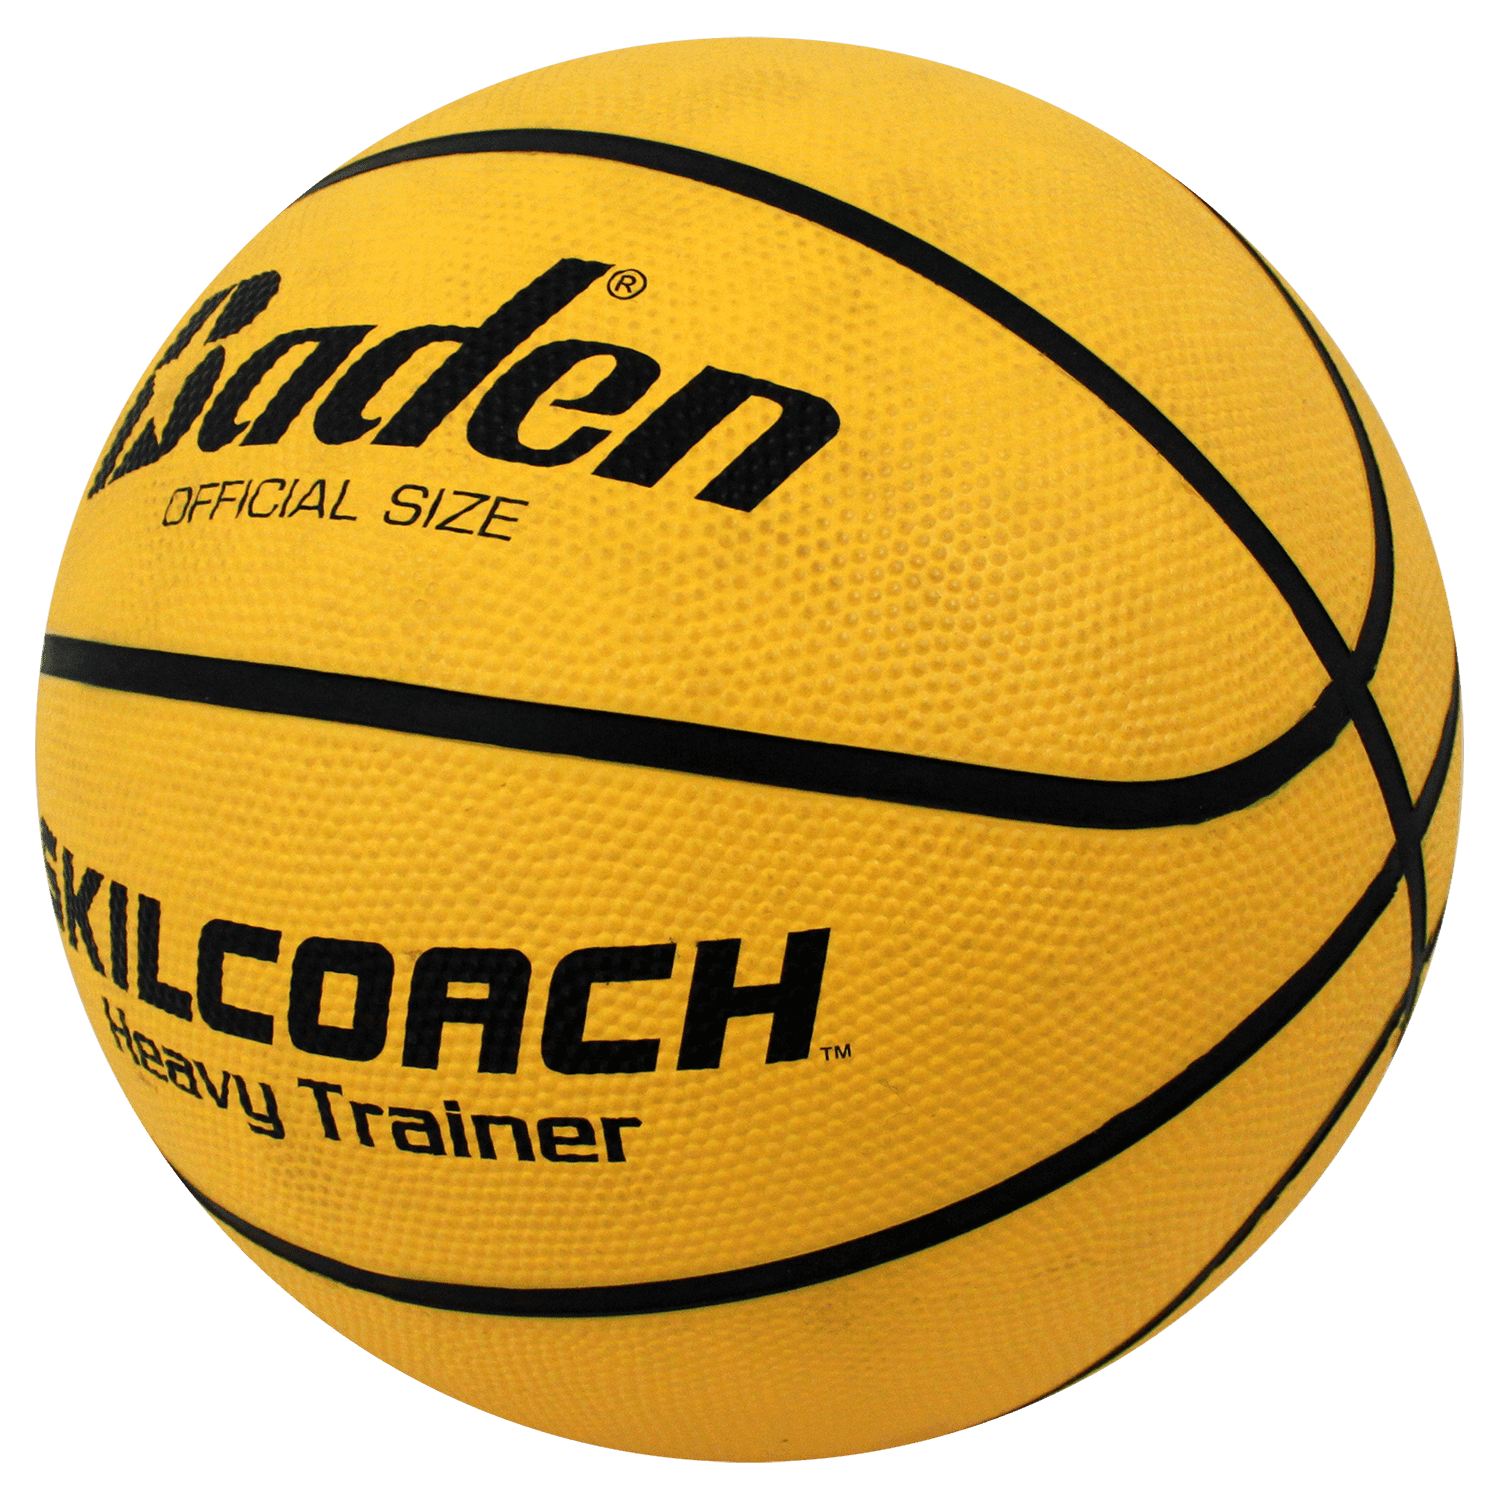 Baden Skilcoach Official Heavy Trainer Rubber Basketball 